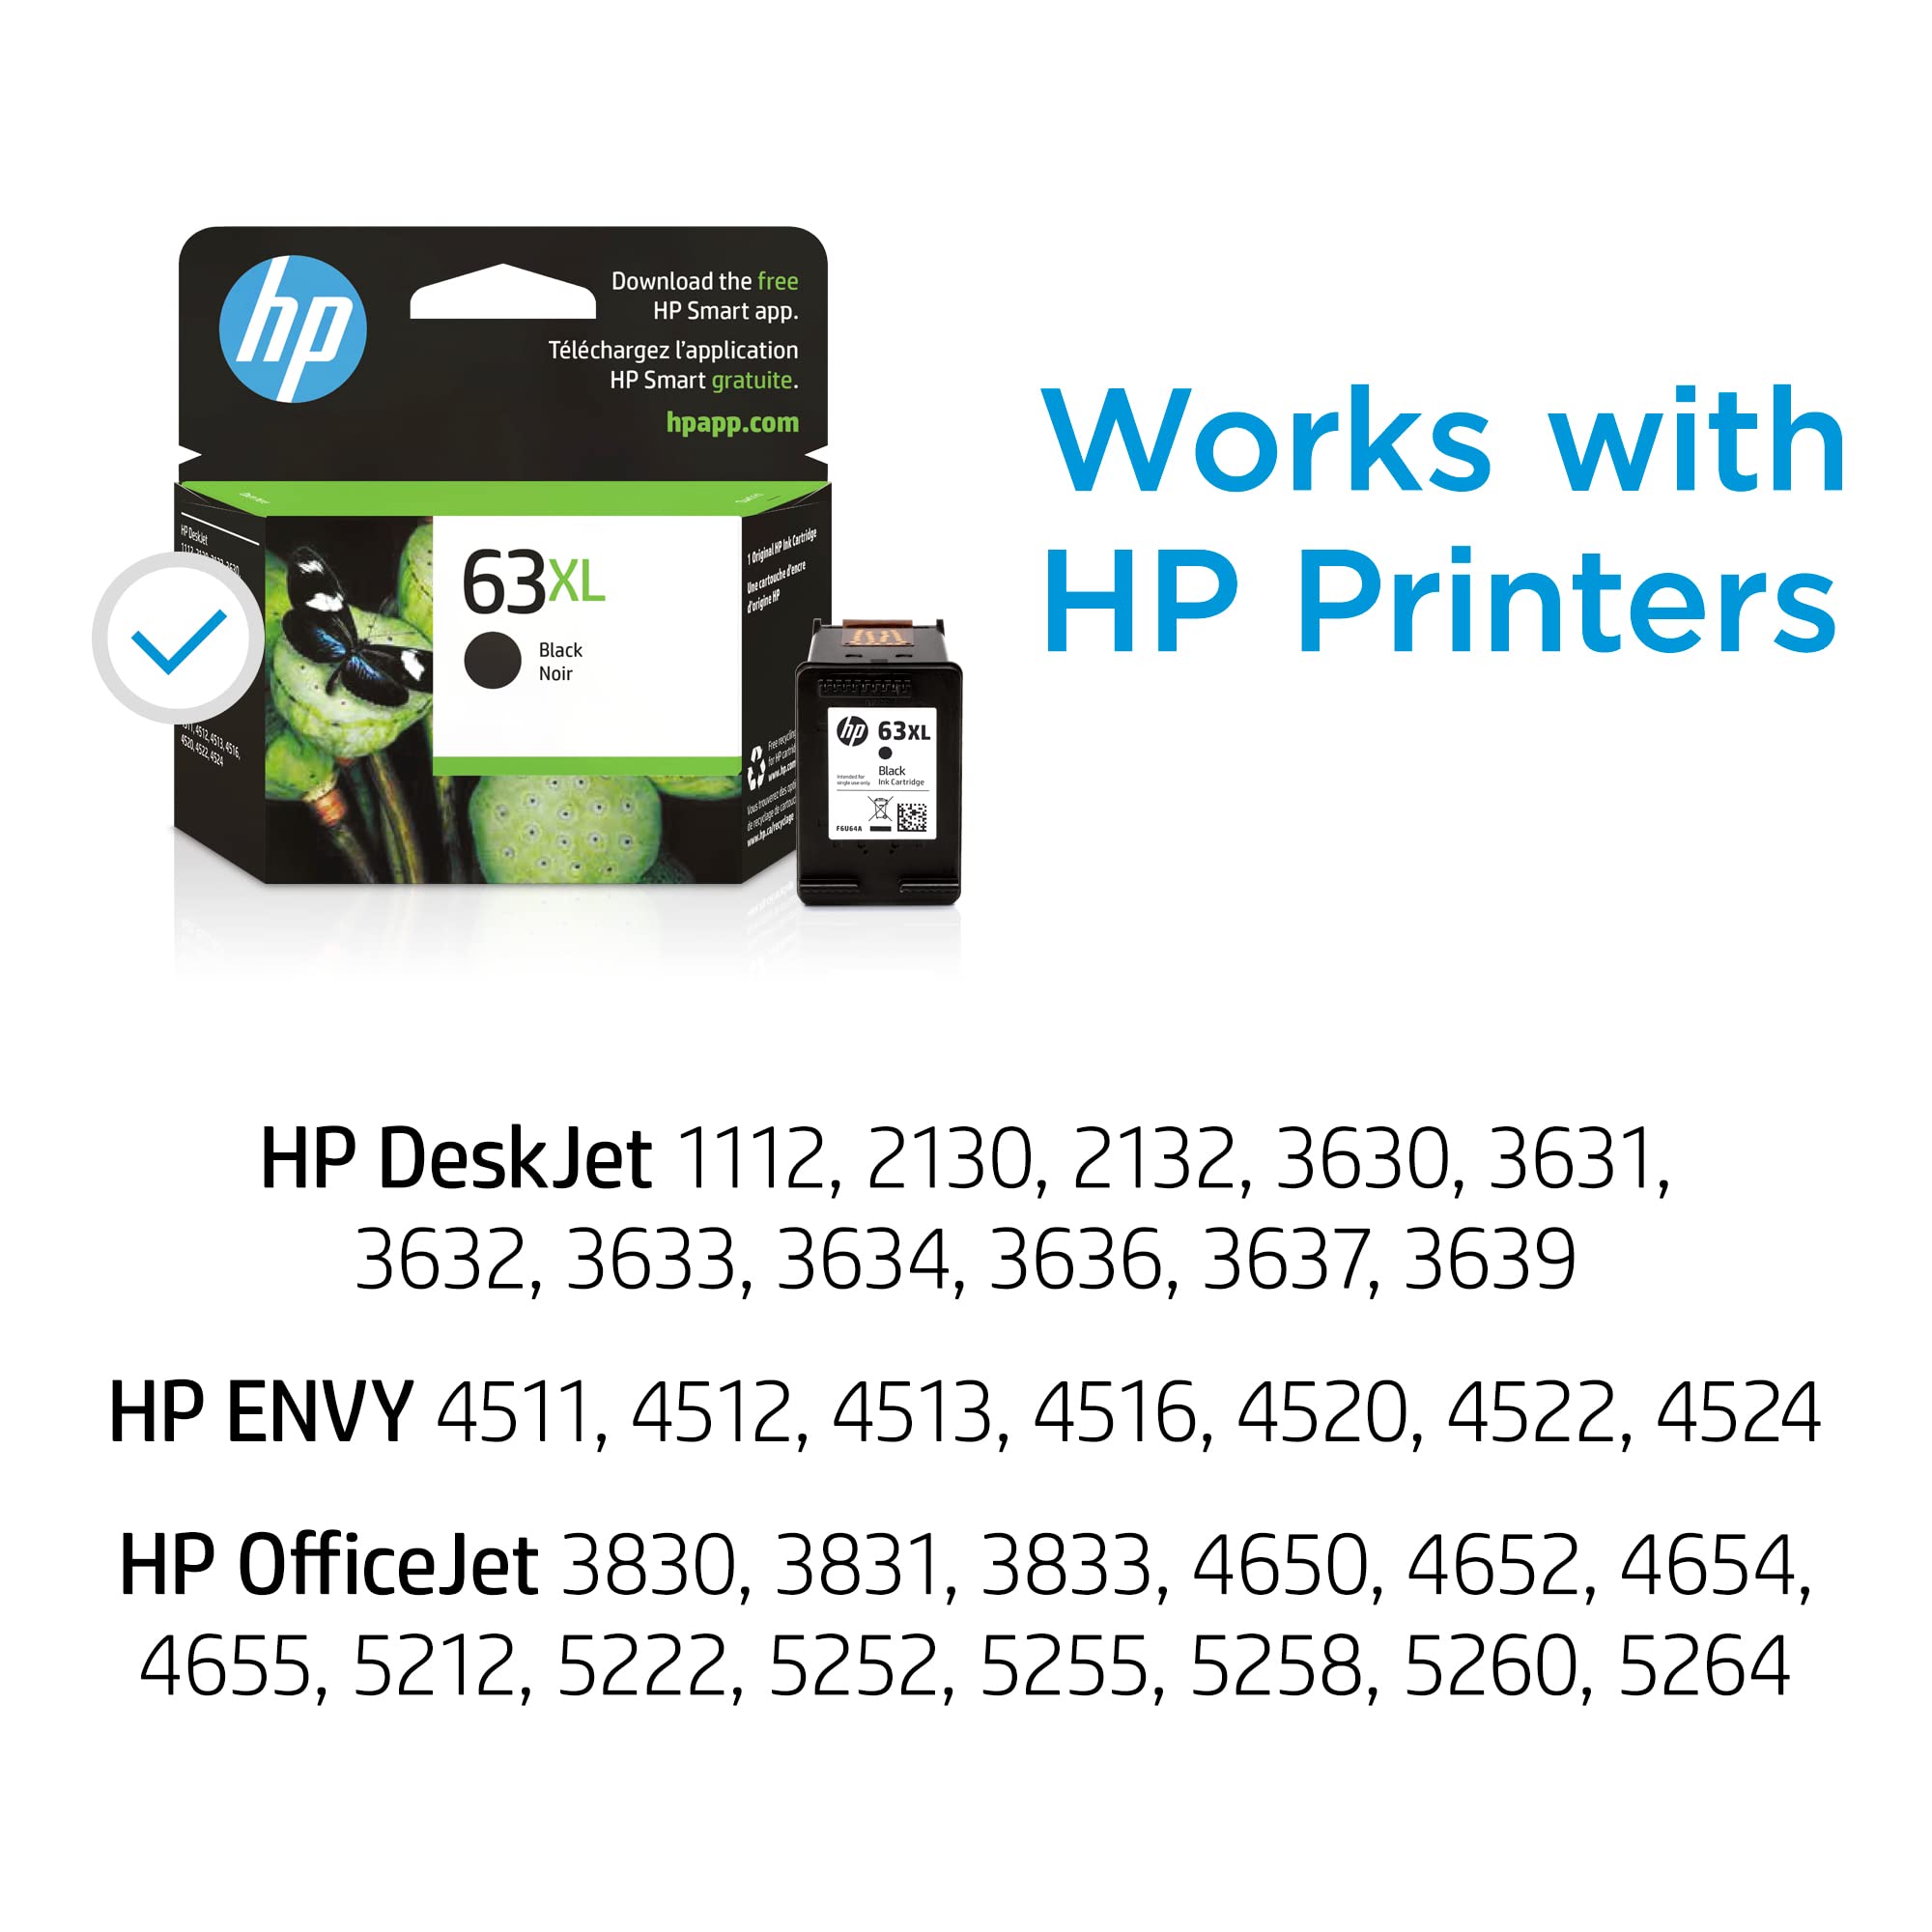 HP 63XL Black High-yield Ink Cartridge | Works with HP DeskJet 1112, 2130, 3630 Series; HP ENVY 4510, 4520 Series; HP OfficeJet 3830, 4650, 5200 Series | Eligible for Instant Ink | F6U64AN